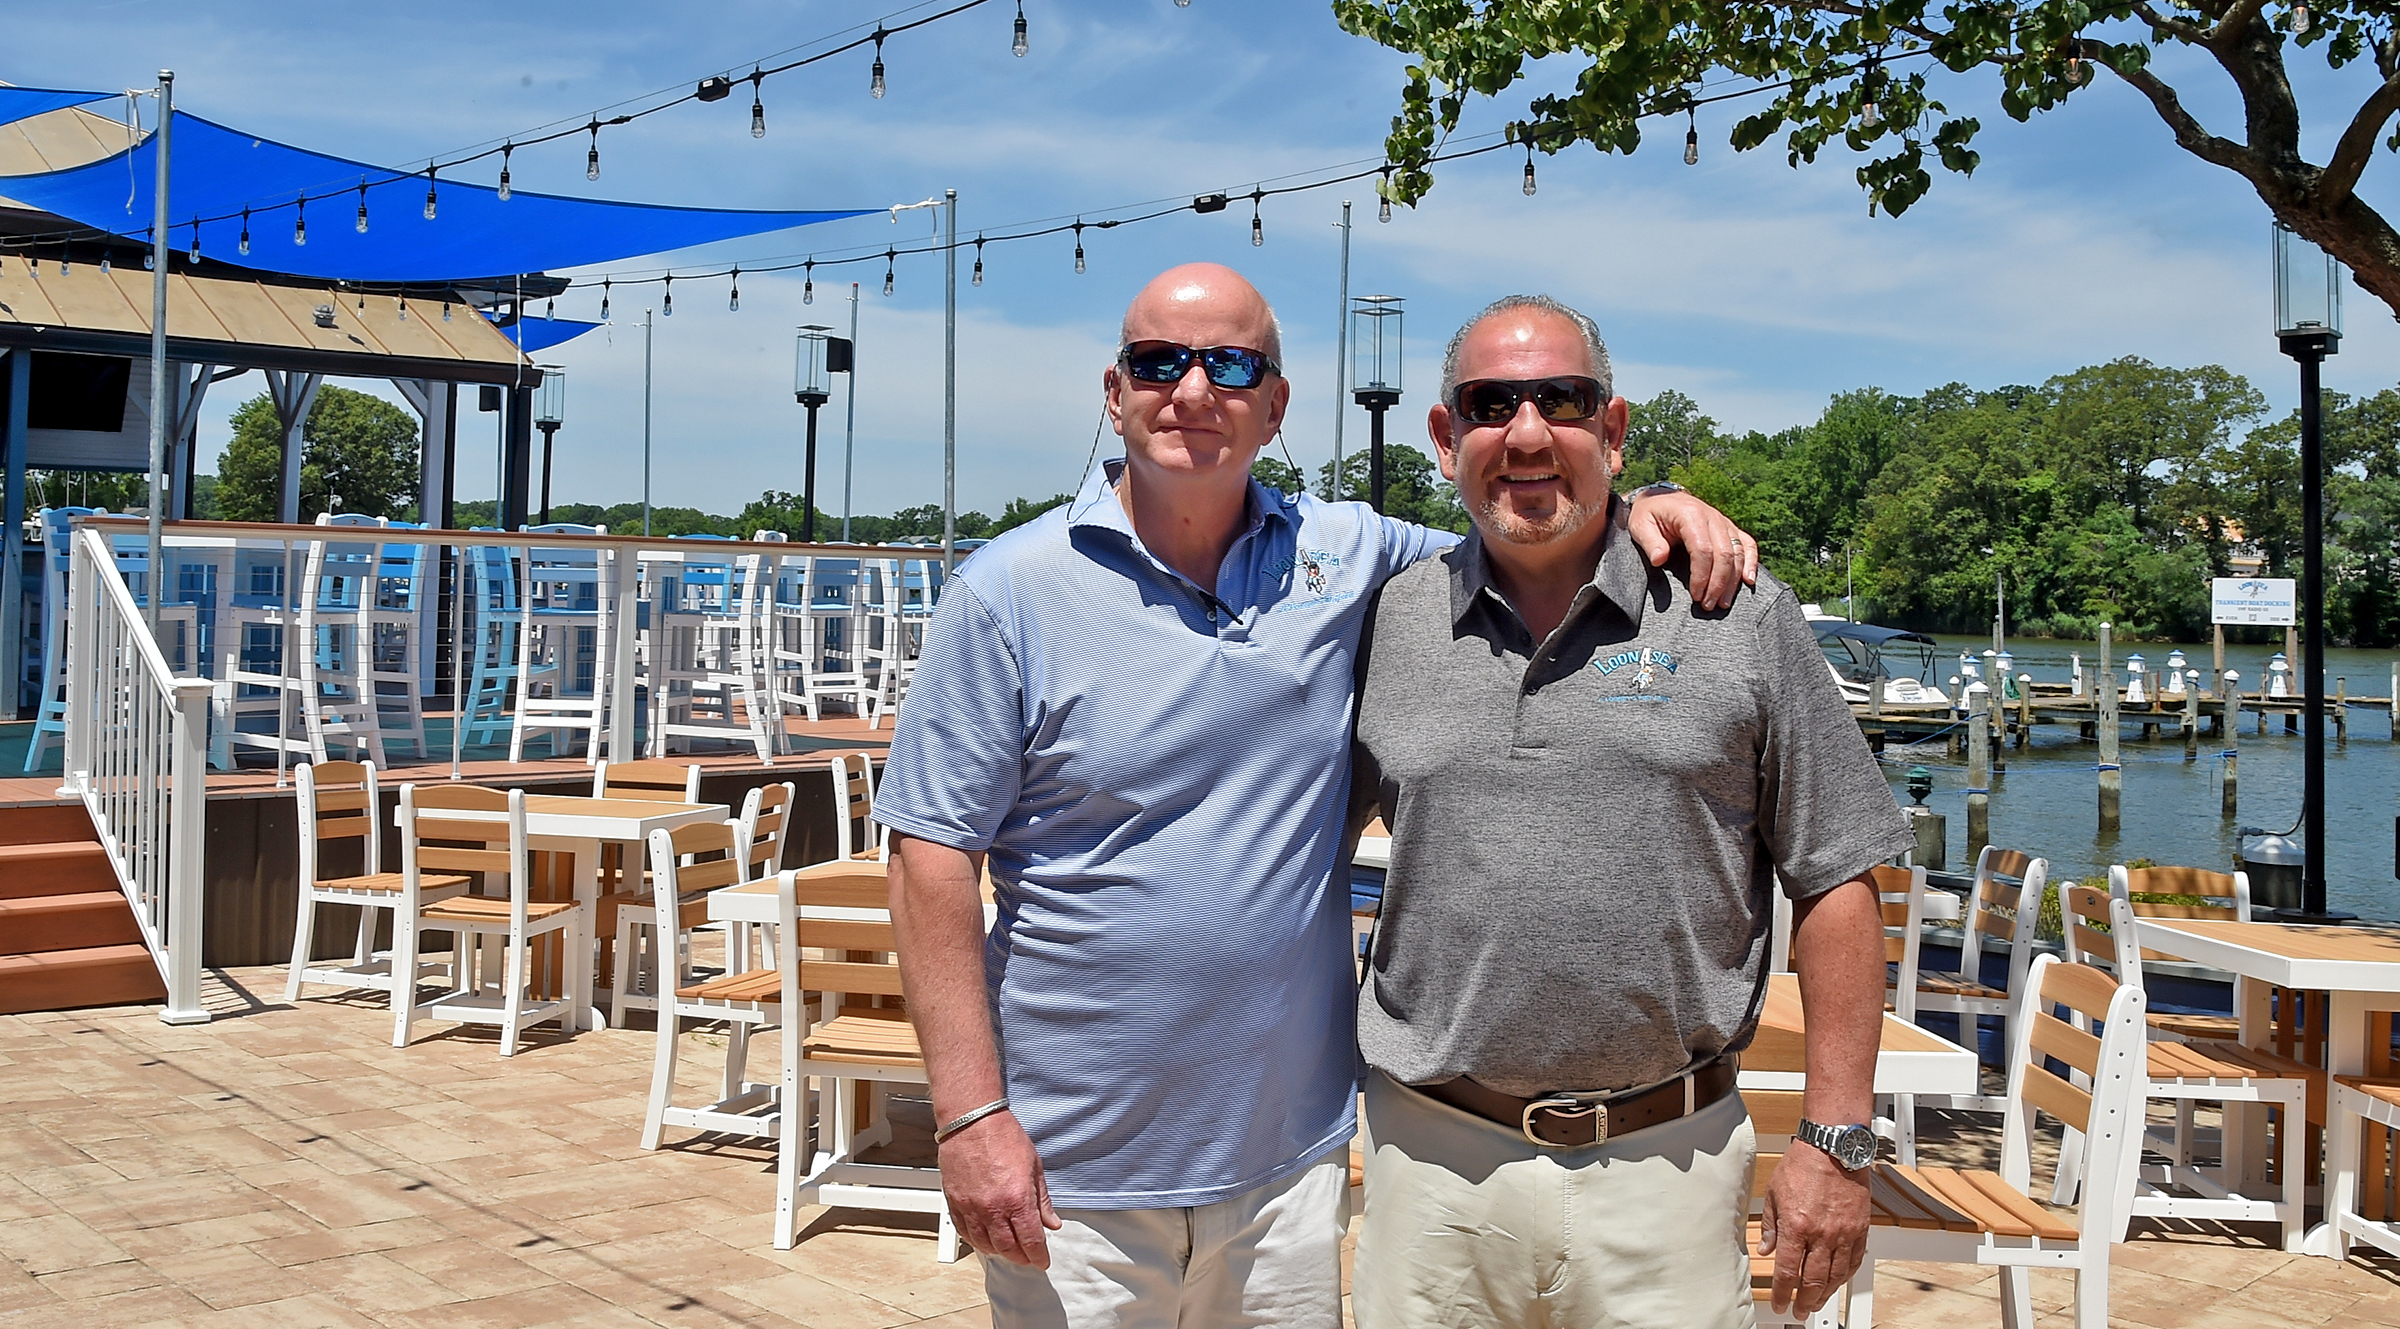 Owners Bill Larney, left, and Steven Litrenta, right, have been partners in 6 restaurants for 32 years. Their new restaurant/bar, LoonASea, is on the waterfront of Hopkins Creek in Essex. (Barbara Haddock Taylor/Staff)